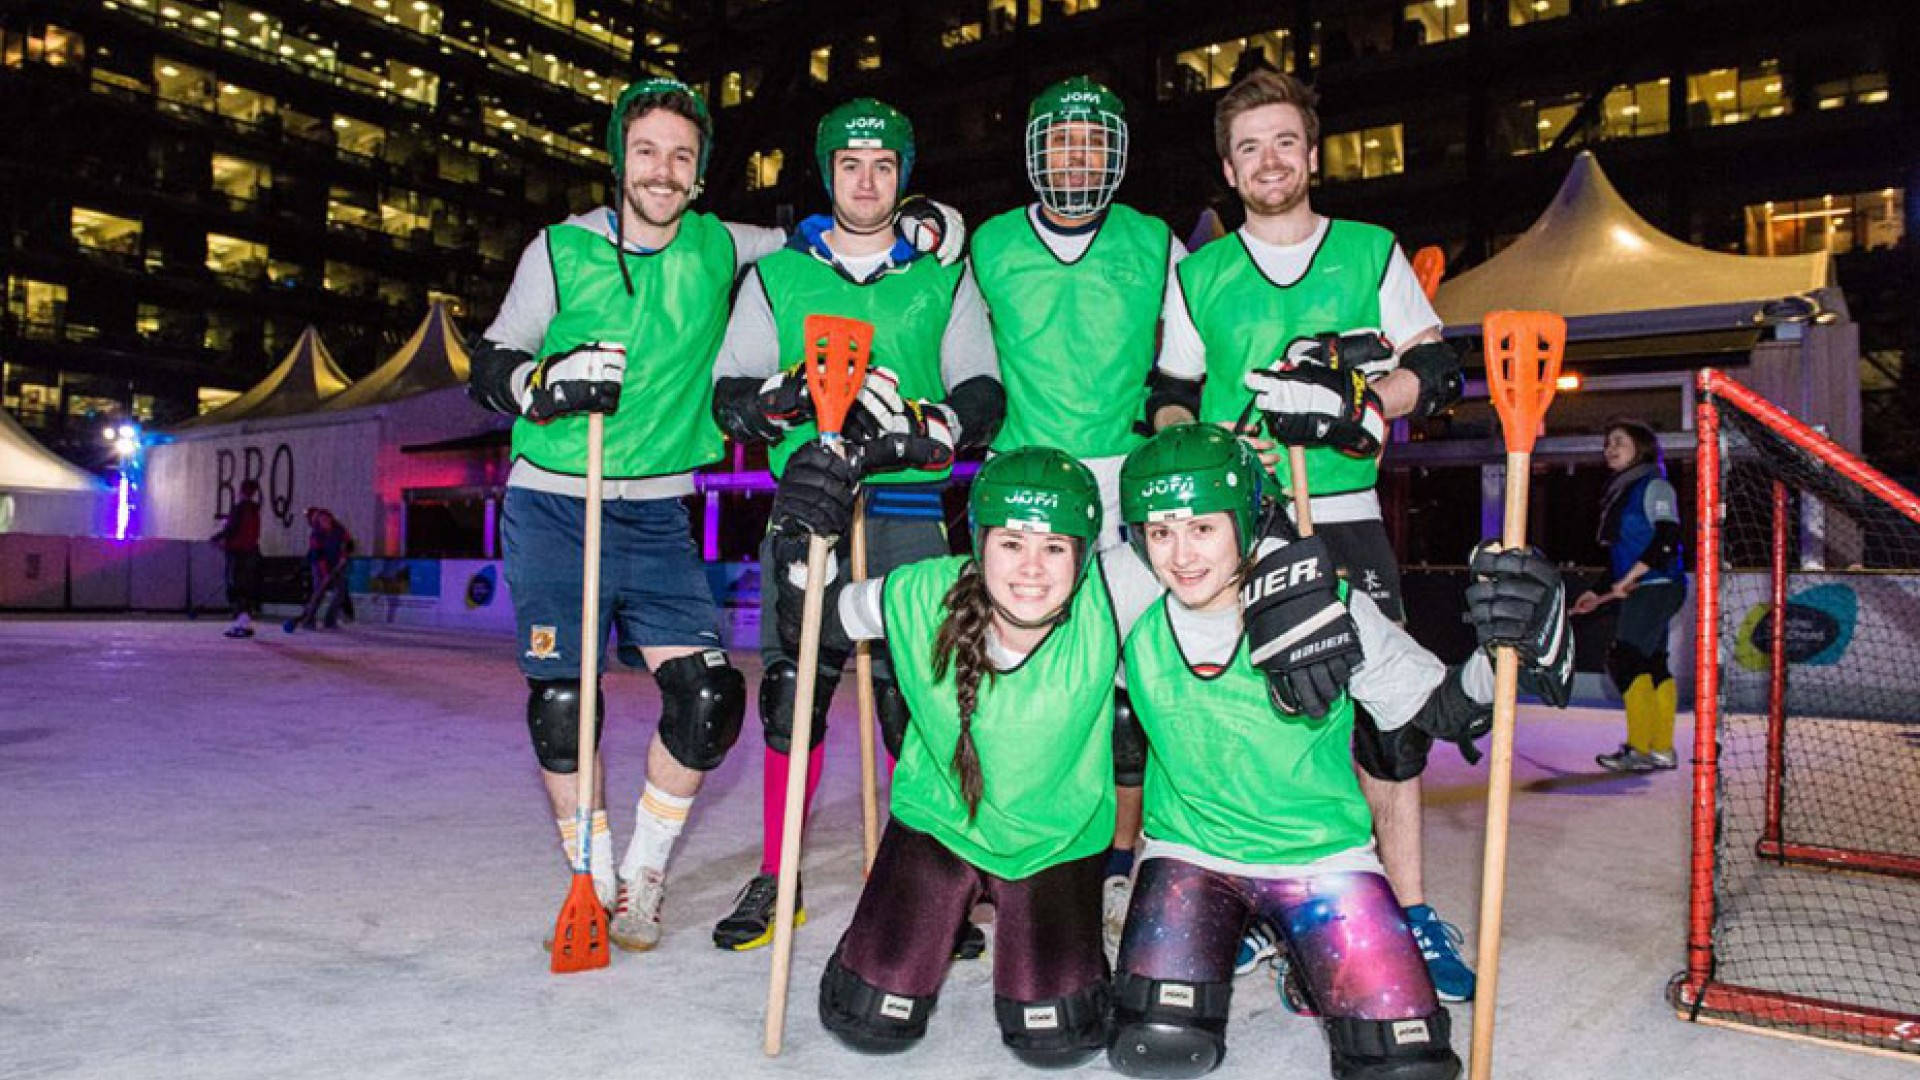 Competitive Broomball Teams in Action Wallpaper